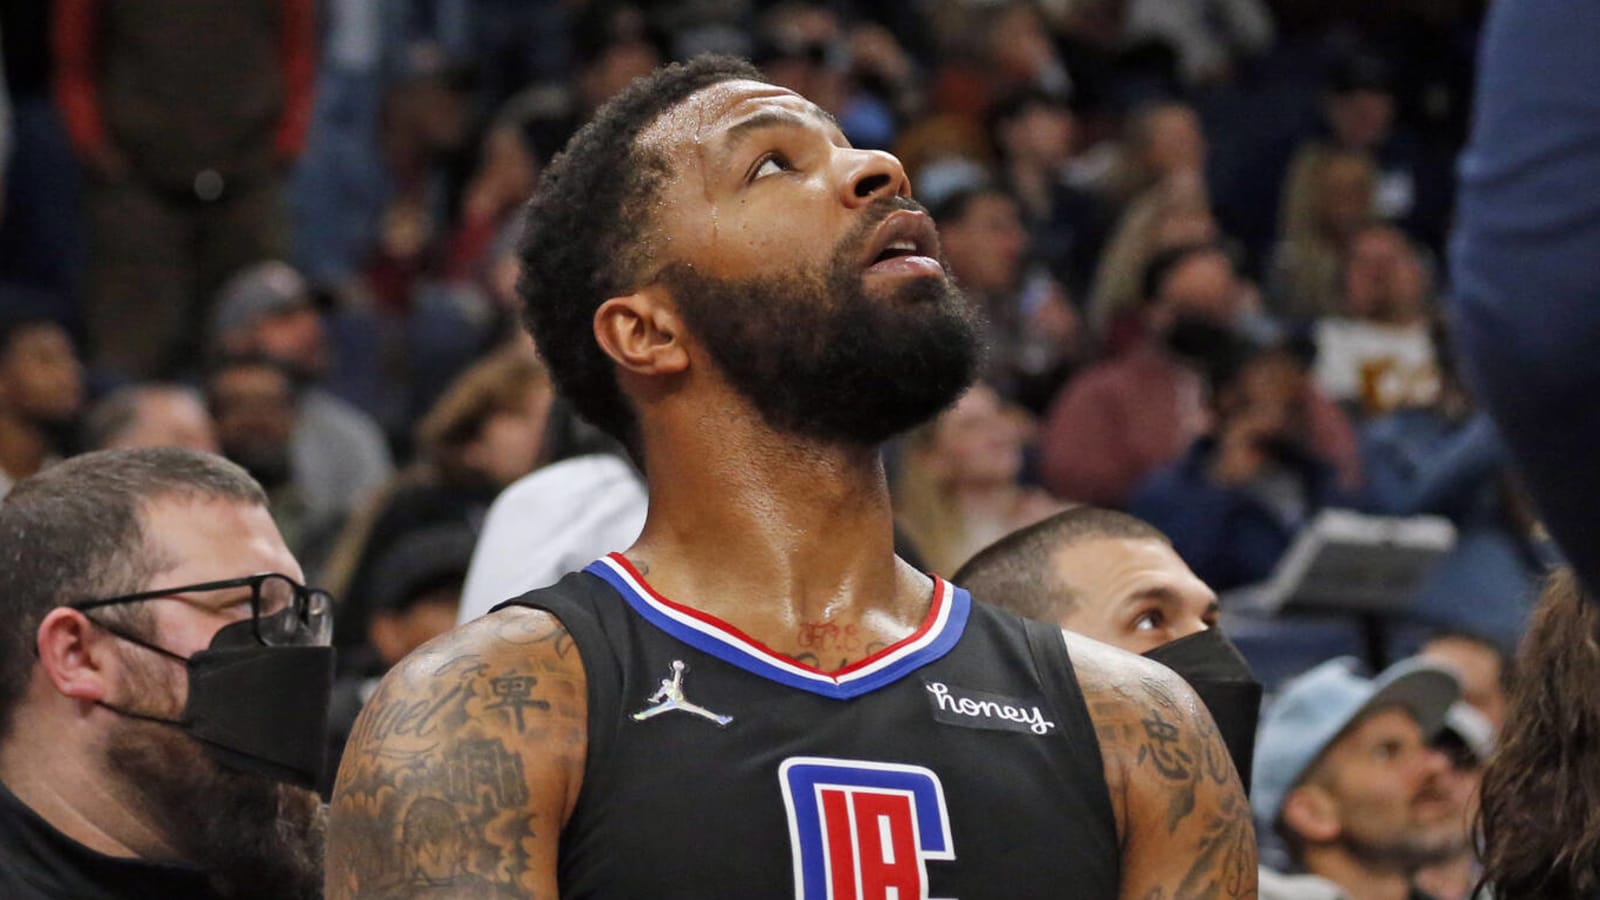 Watch: Clippers' Marcus Morris ejected for flagrant foul on Grizzlies' Ja Morant